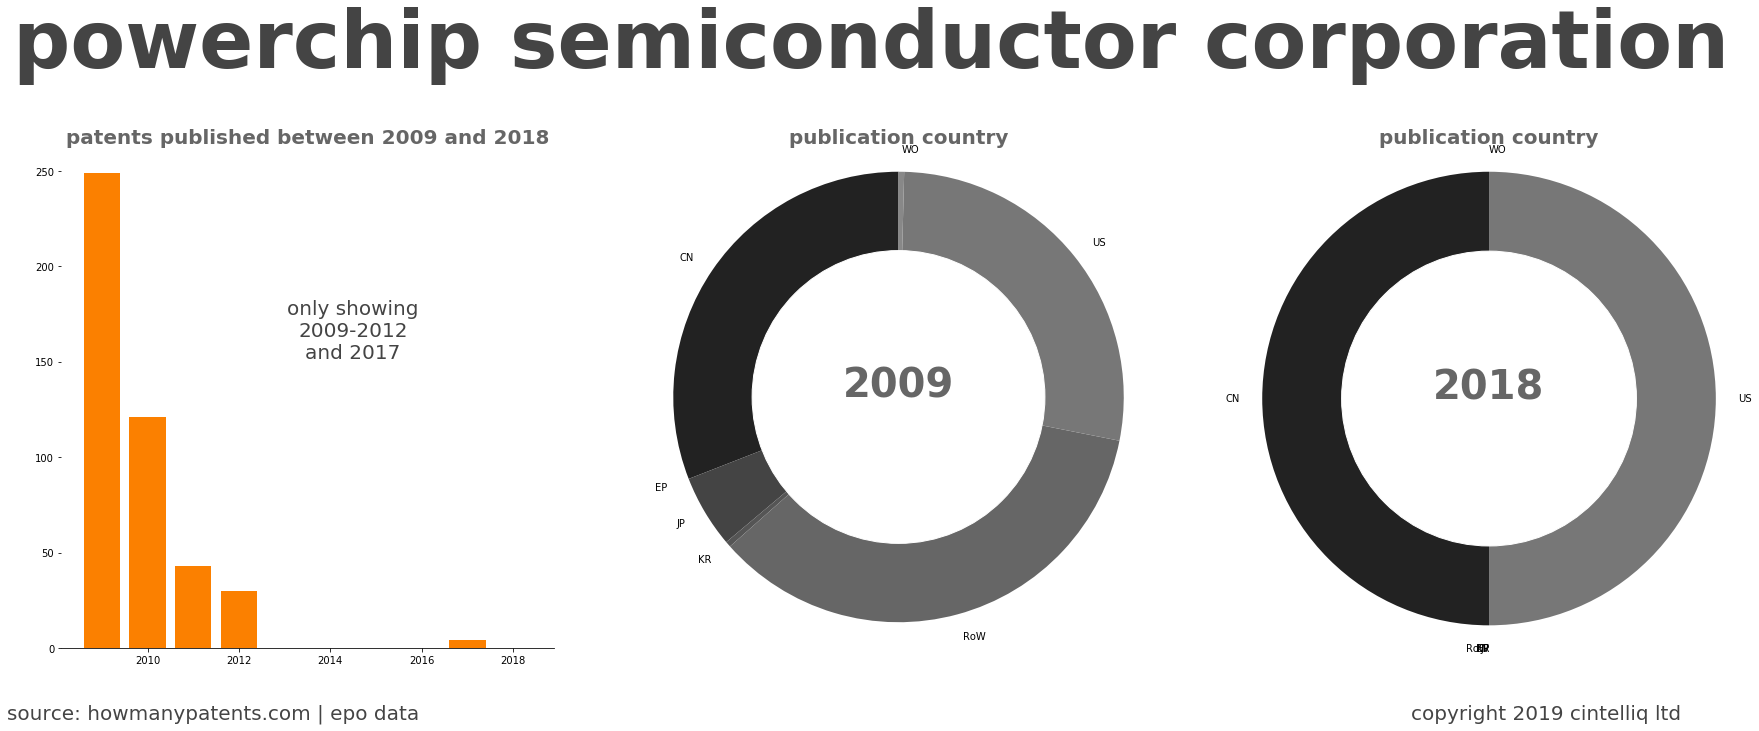 summary of patents for Powerchip Semiconductor Corporation